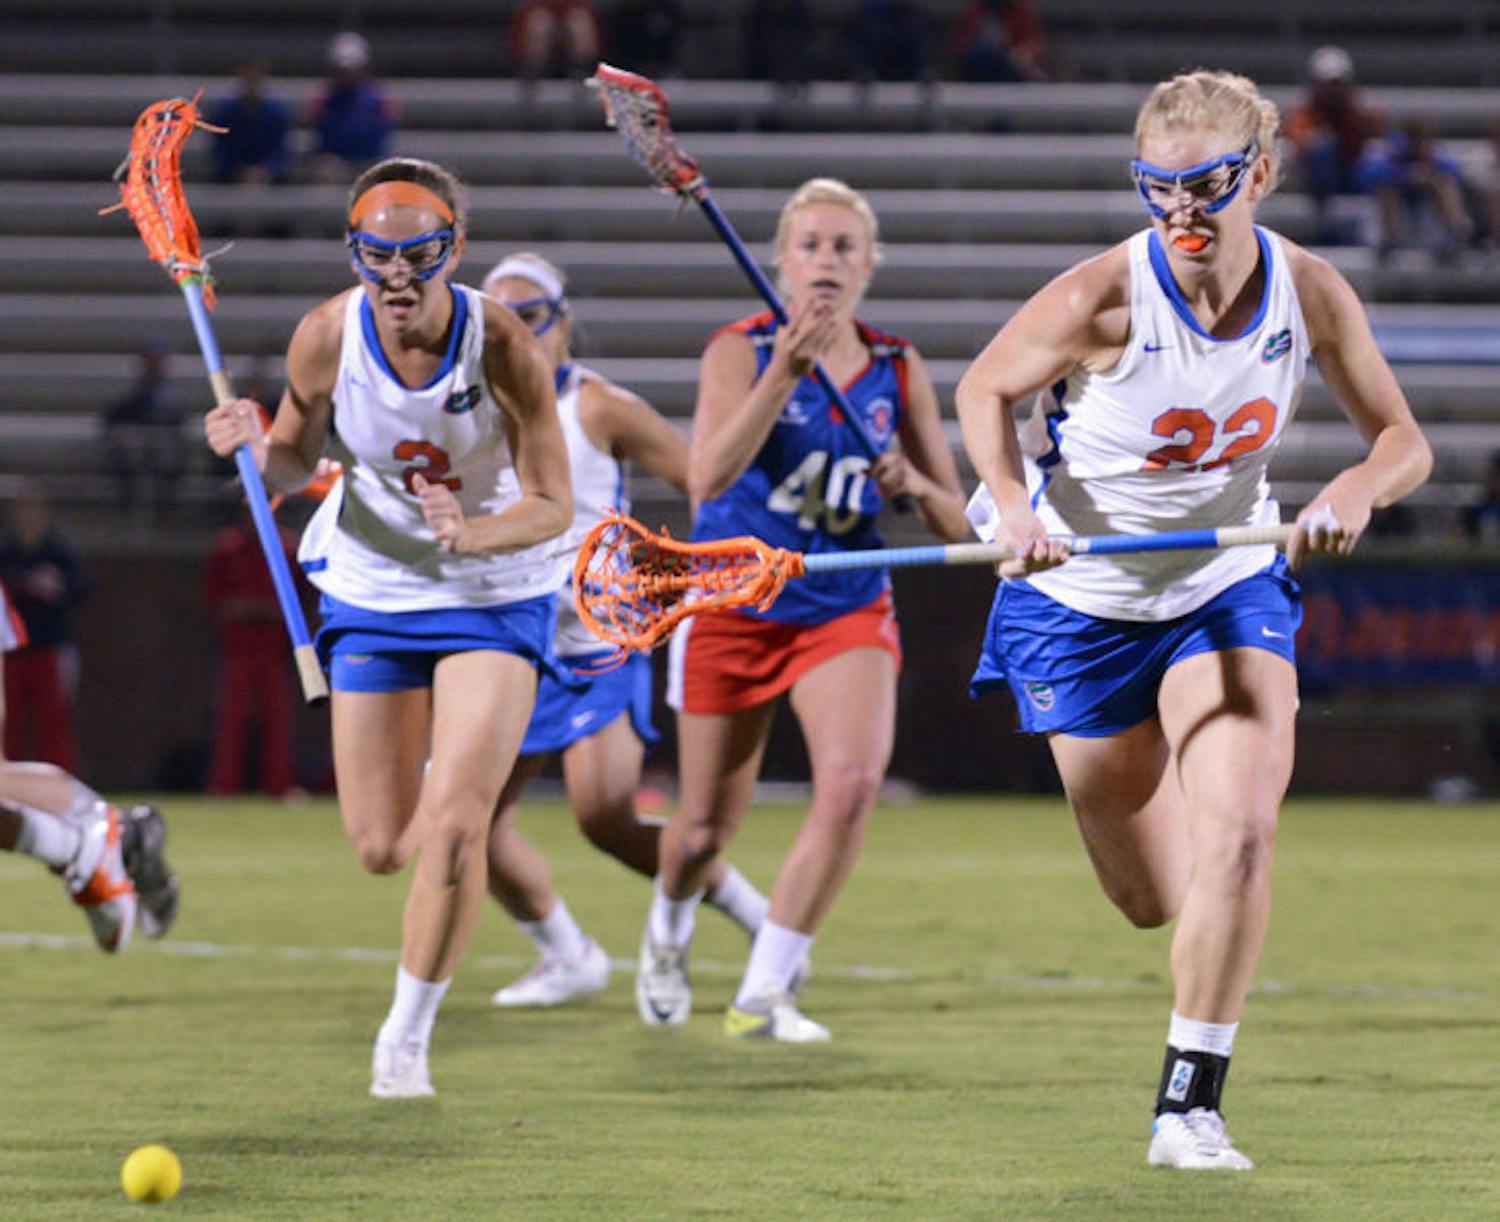 Senior Brittany Dashiell (22) runs after the ball during Florida’s 18-13 exhibition win against England on Jan. 24 at Dizney Stadium. Dashiell became the first Gator to record 200 career draw controls on Saturday.